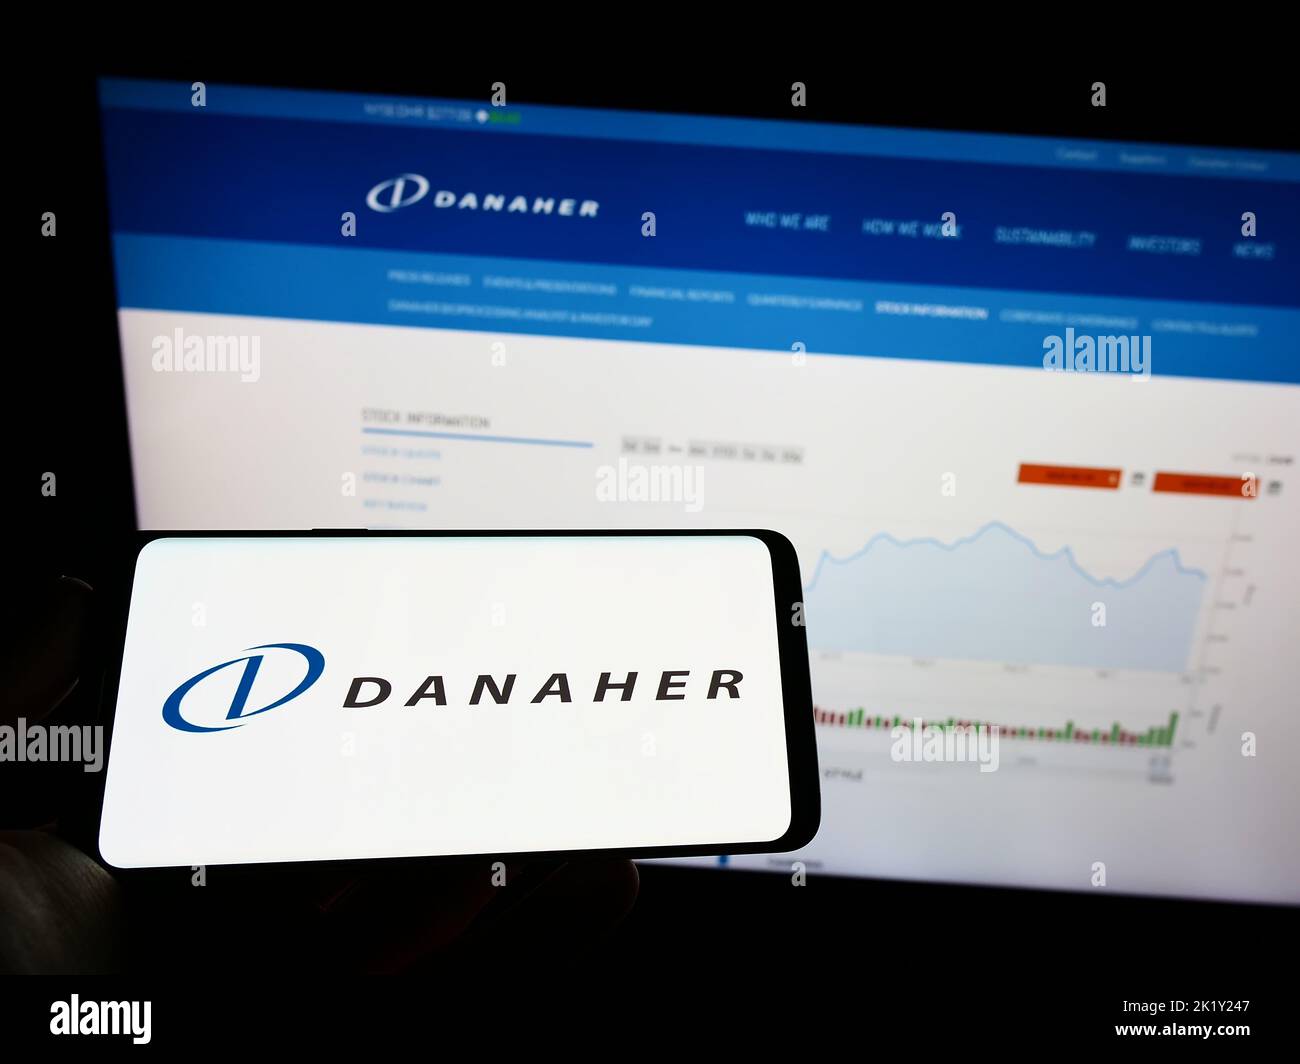 Person holding cellphone with logo of US conglomerate Danaher Corporation on screen in front of business webpage. Focus on phone display. Stock Photo